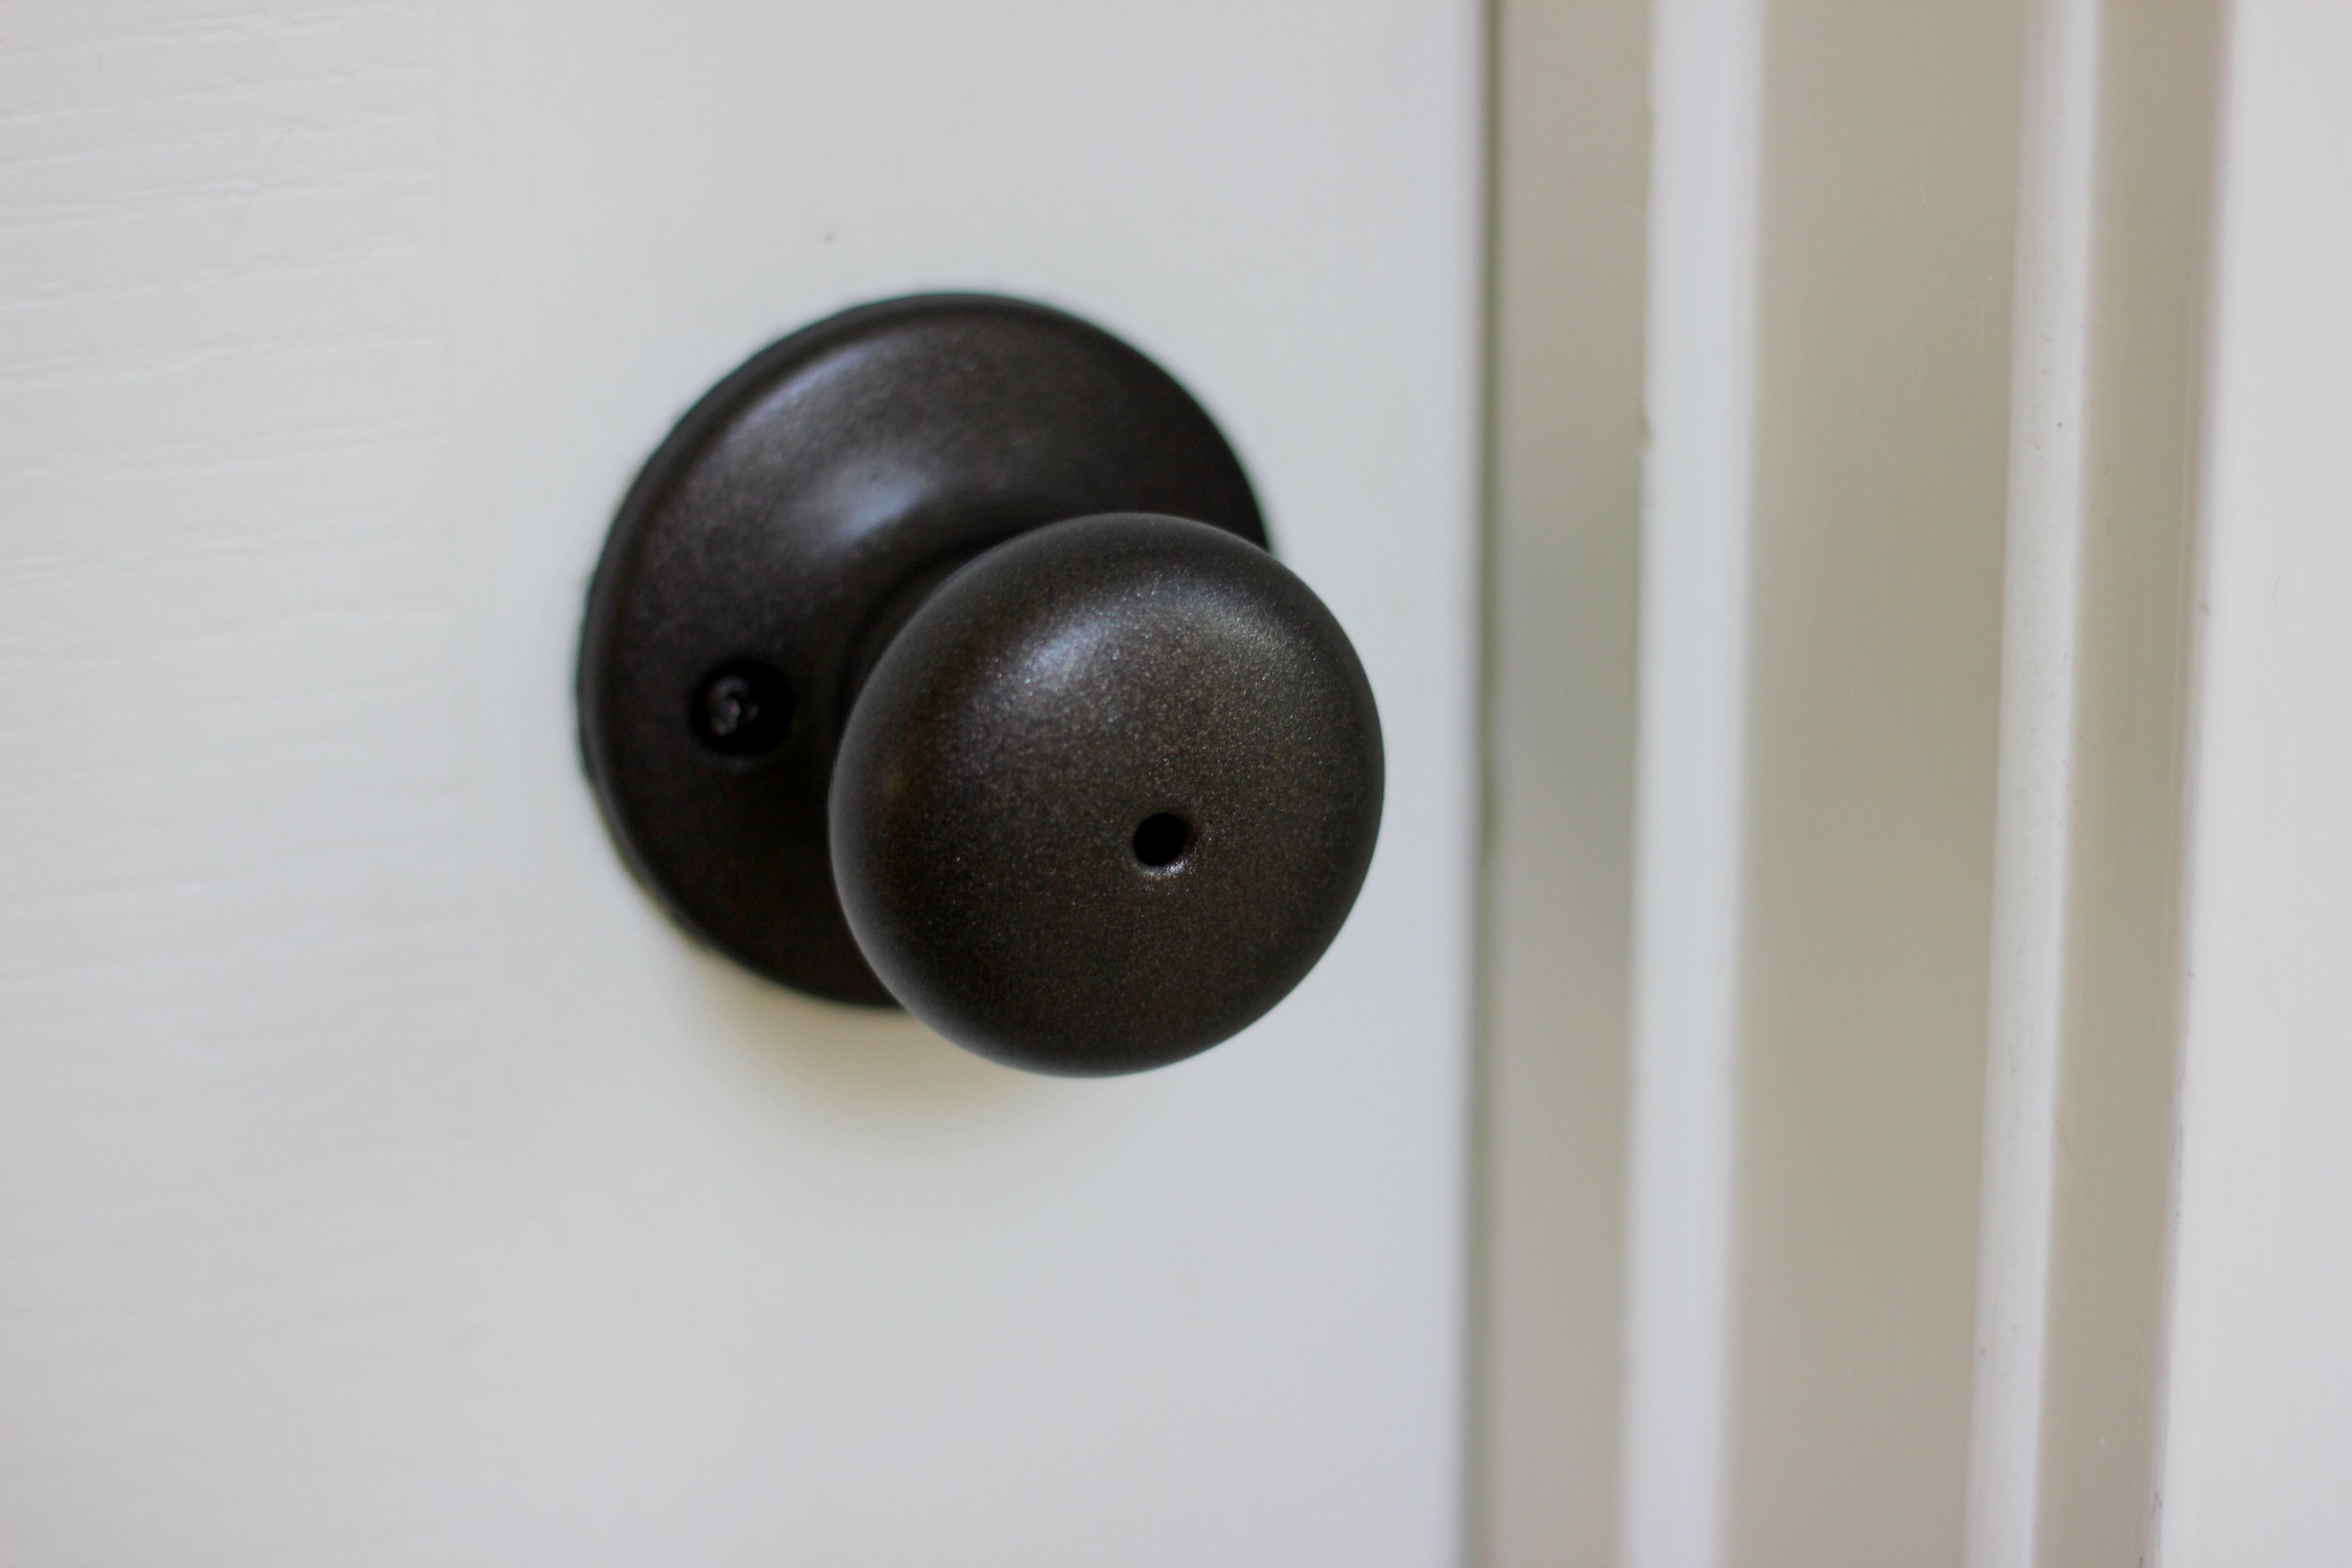 How to Paint Door Knobs and Hardware So They Look New Again